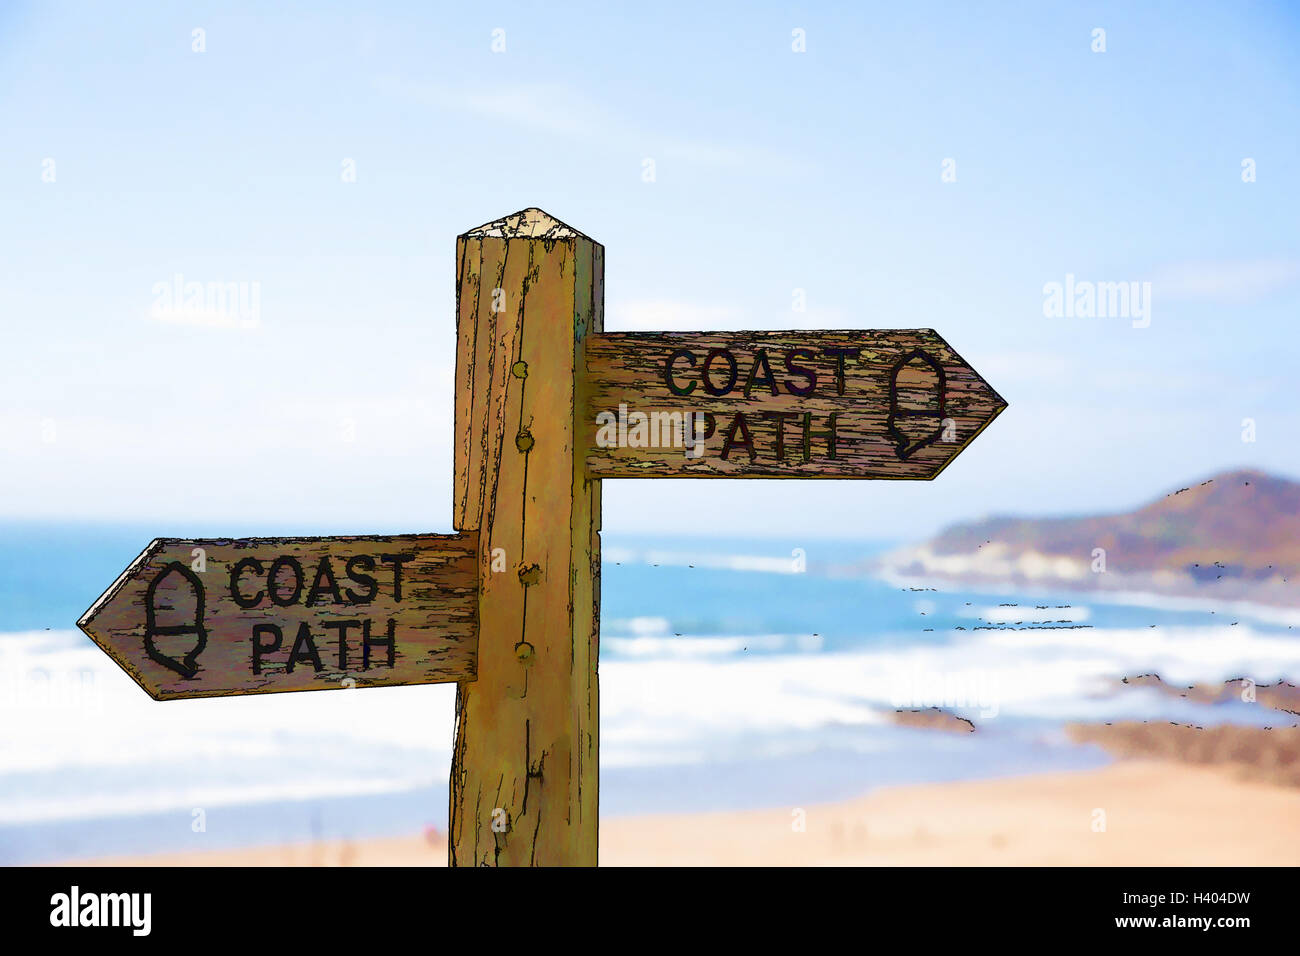 Coast path sign by beach and coast bright colours illustration Stock Photo